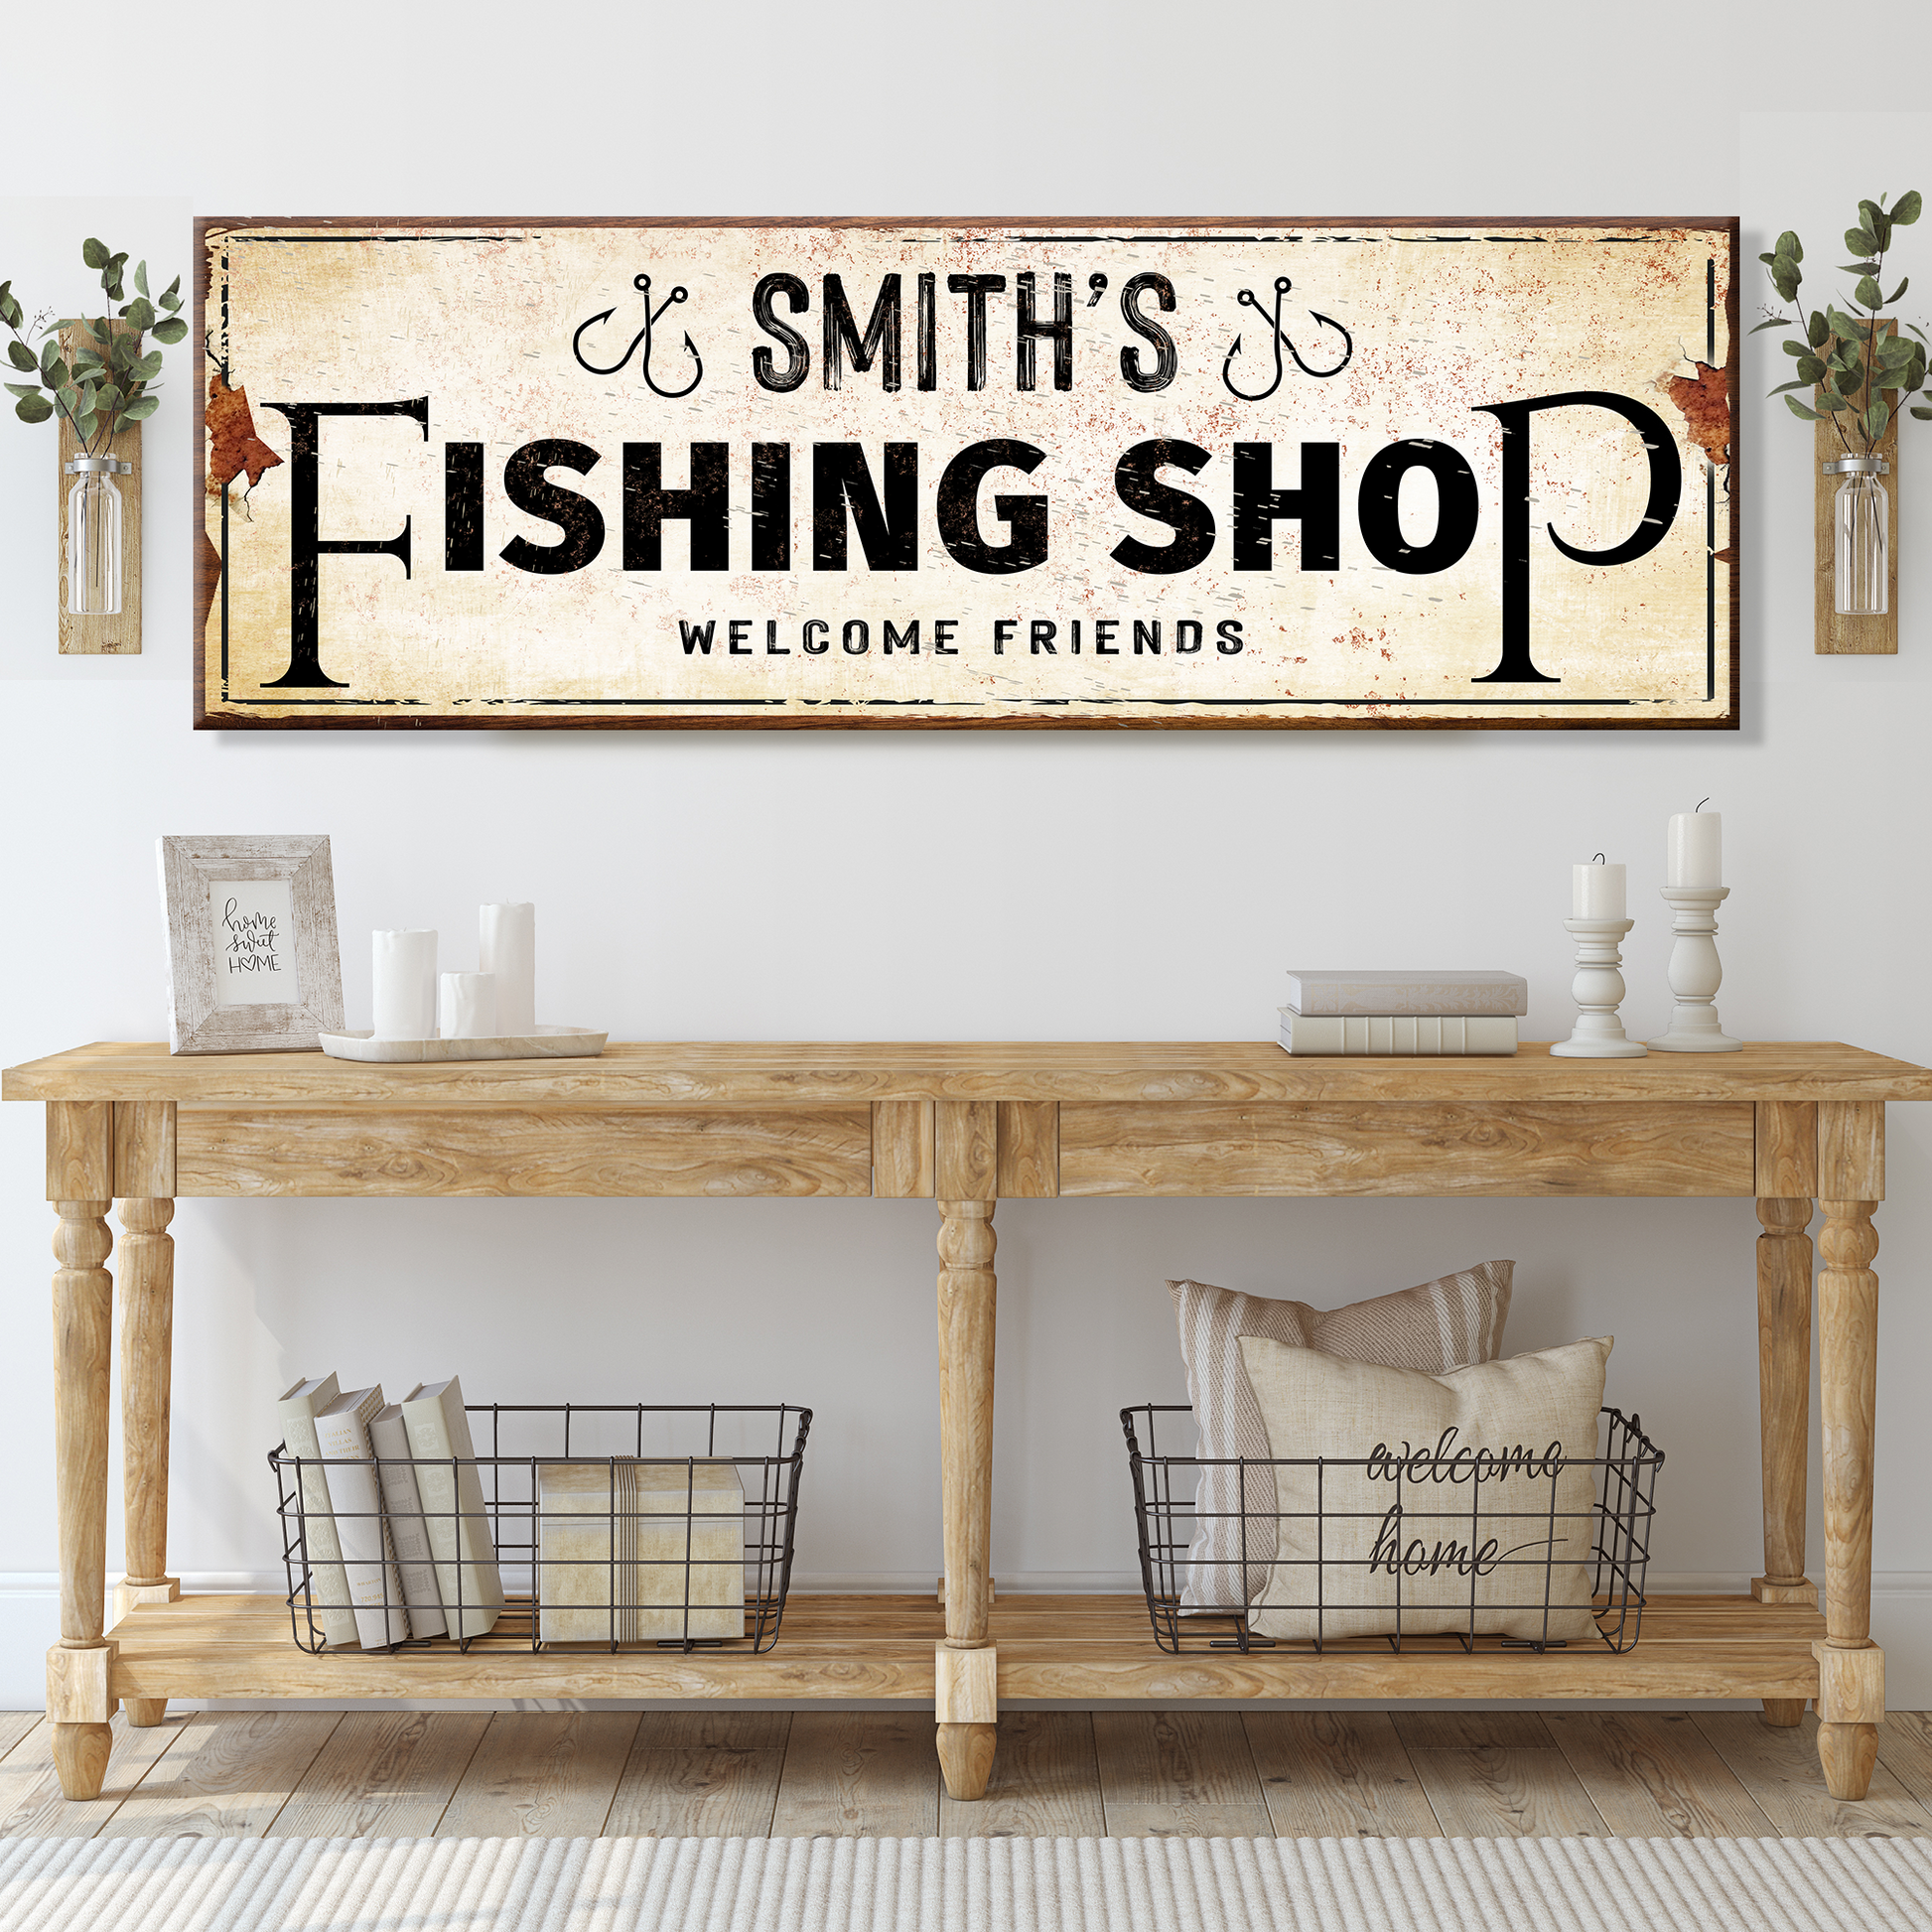 Fishing Shop Sign - Image by Tailored Canvases